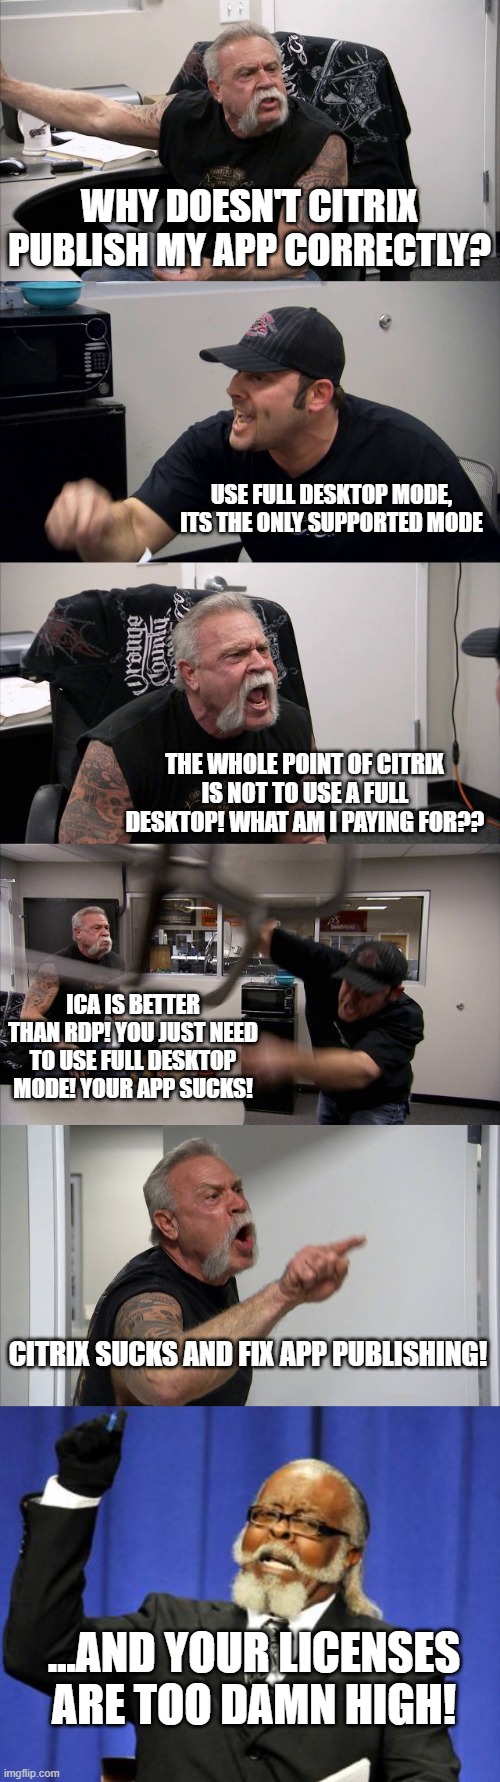 Citrix sucks | WHY DOESN'T CITRIX PUBLISH MY APP CORRECTLY? USE FULL DESKTOP MODE, ITS THE ONLY SUPPORTED MODE; THE WHOLE POINT OF CITRIX IS NOT TO USE A FULL DESKTOP! WHAT AM I PAYING FOR?? ICA IS BETTER THAN RDP! YOU JUST NEED TO USE FULL DESKTOP MODE! YOUR APP SUCKS! CITRIX SUCKS AND FIX APP PUBLISHING! ...AND YOUR LICENSES ARE TOO DAMN HIGH! | image tagged in memes,too damn high,american chopper argument | made w/ Imgflip meme maker